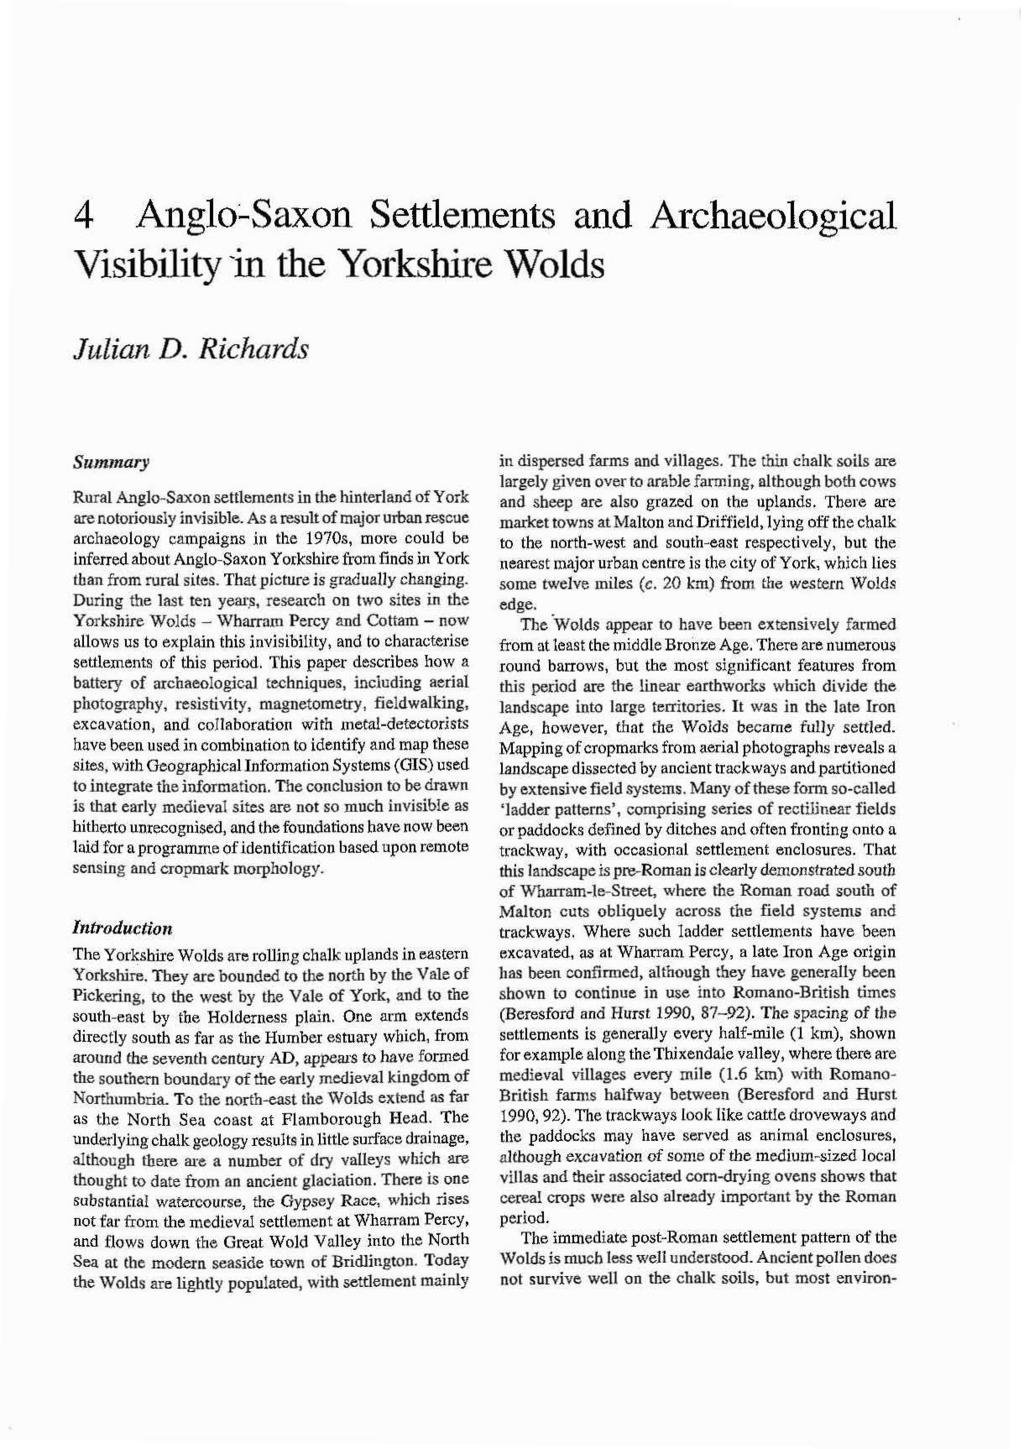 Anglo-Saxon Settlements and Archaeological Visibility -in the Yorkshre Wolds Julian D. Richards Summary Rural Anglo-Saxon settlements in the hinterland of York are notoriously invisible.